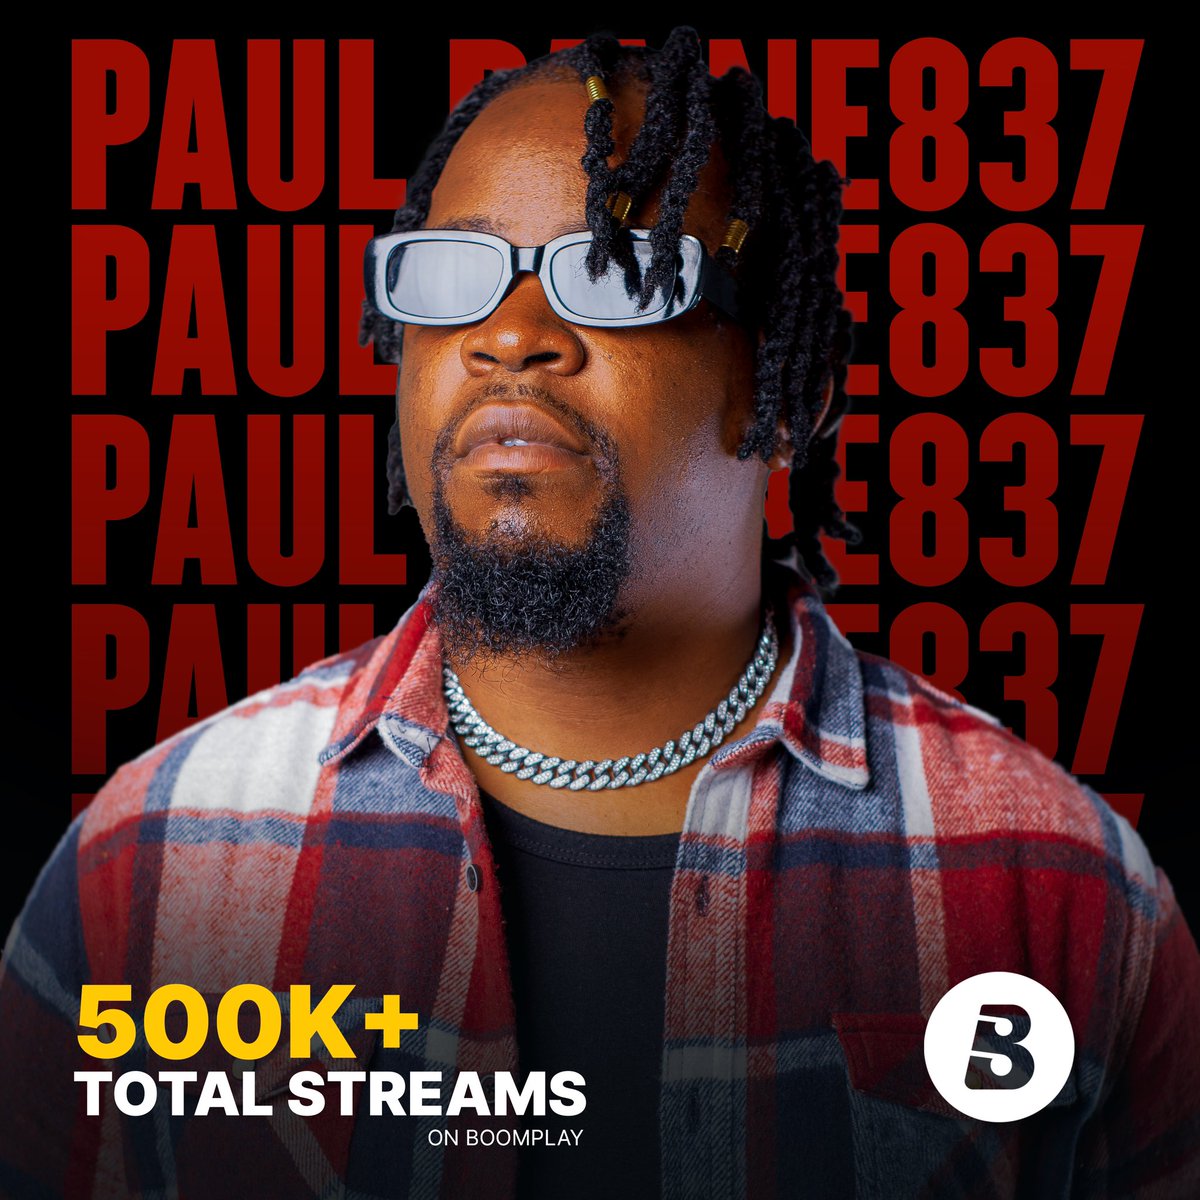 Half a MILLION streams on @BoomplayMusic 🎉 Thank you for the amazing support and love. 🫂 Music connects us all. Let’s aim for a MILLION next. More music coming in 2024! 🙏🏾❤️ #PaulPayne837 #BeOfficial